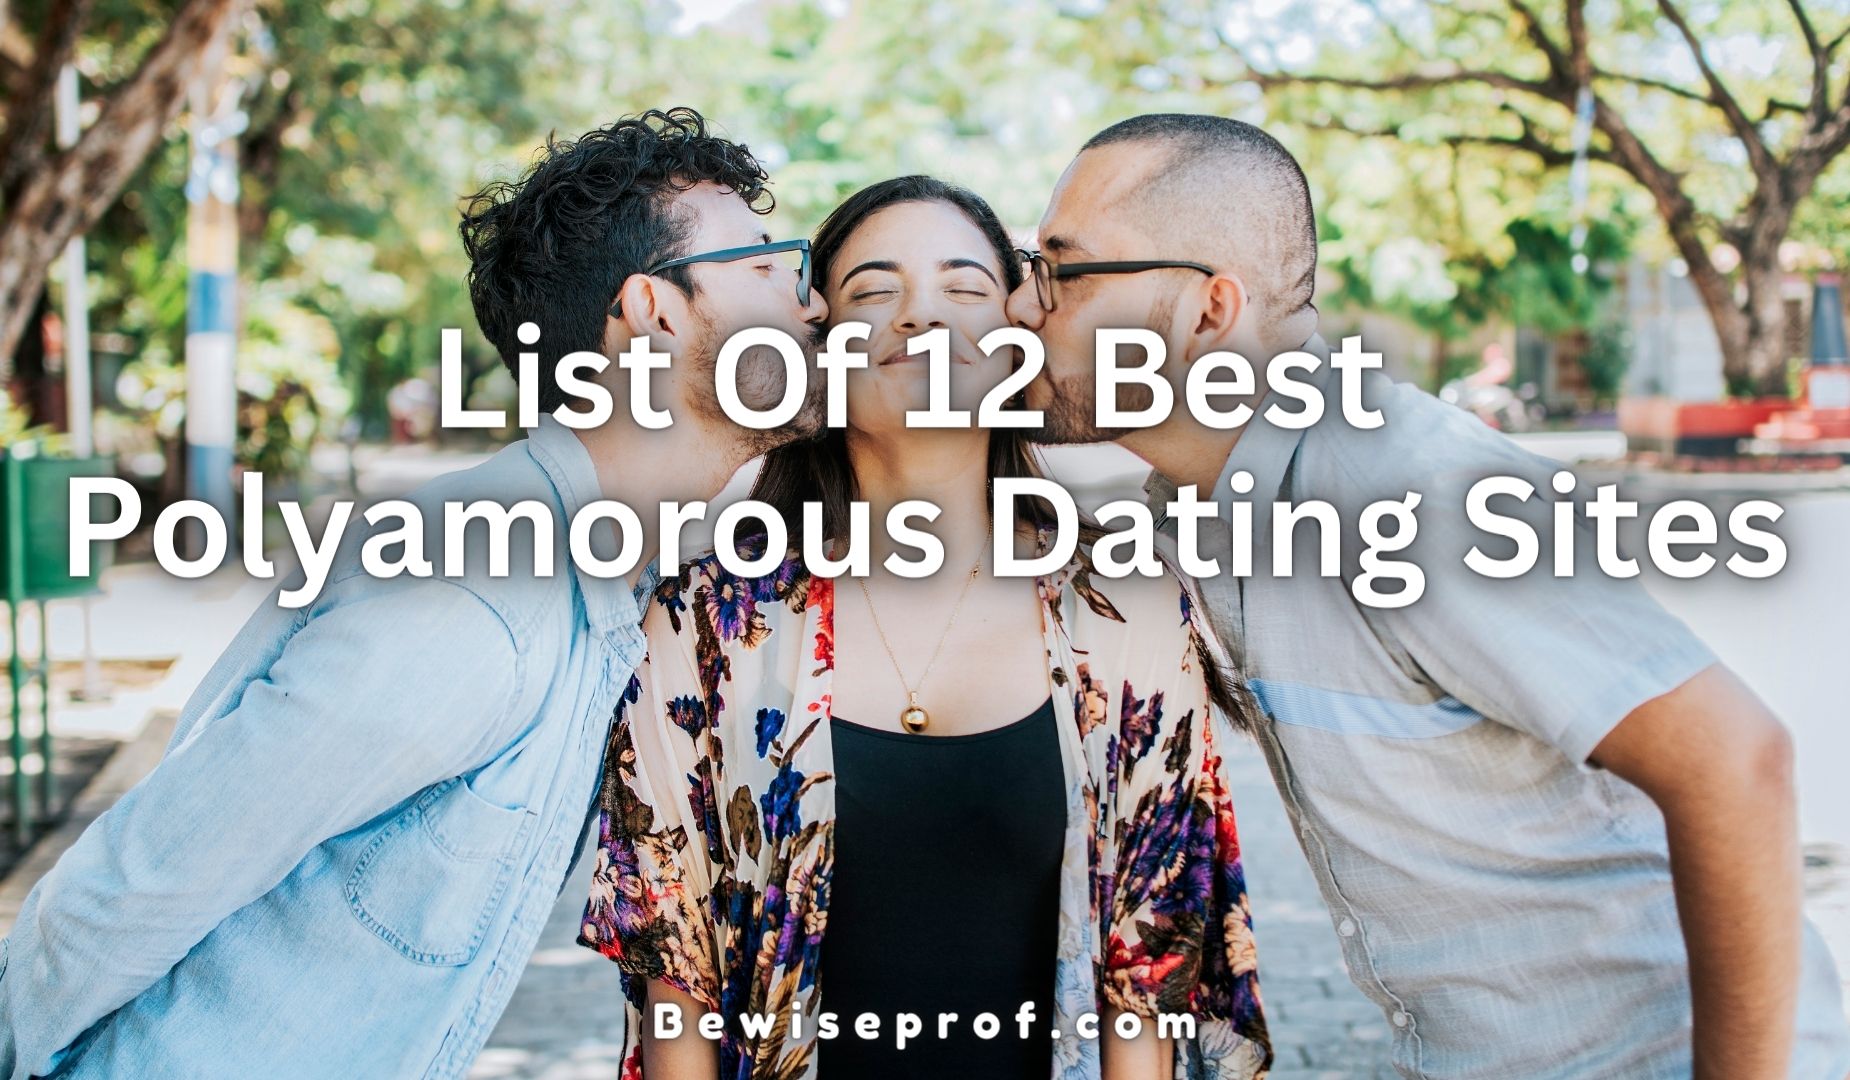 Index 12 Best Polyamorous Dating Sites